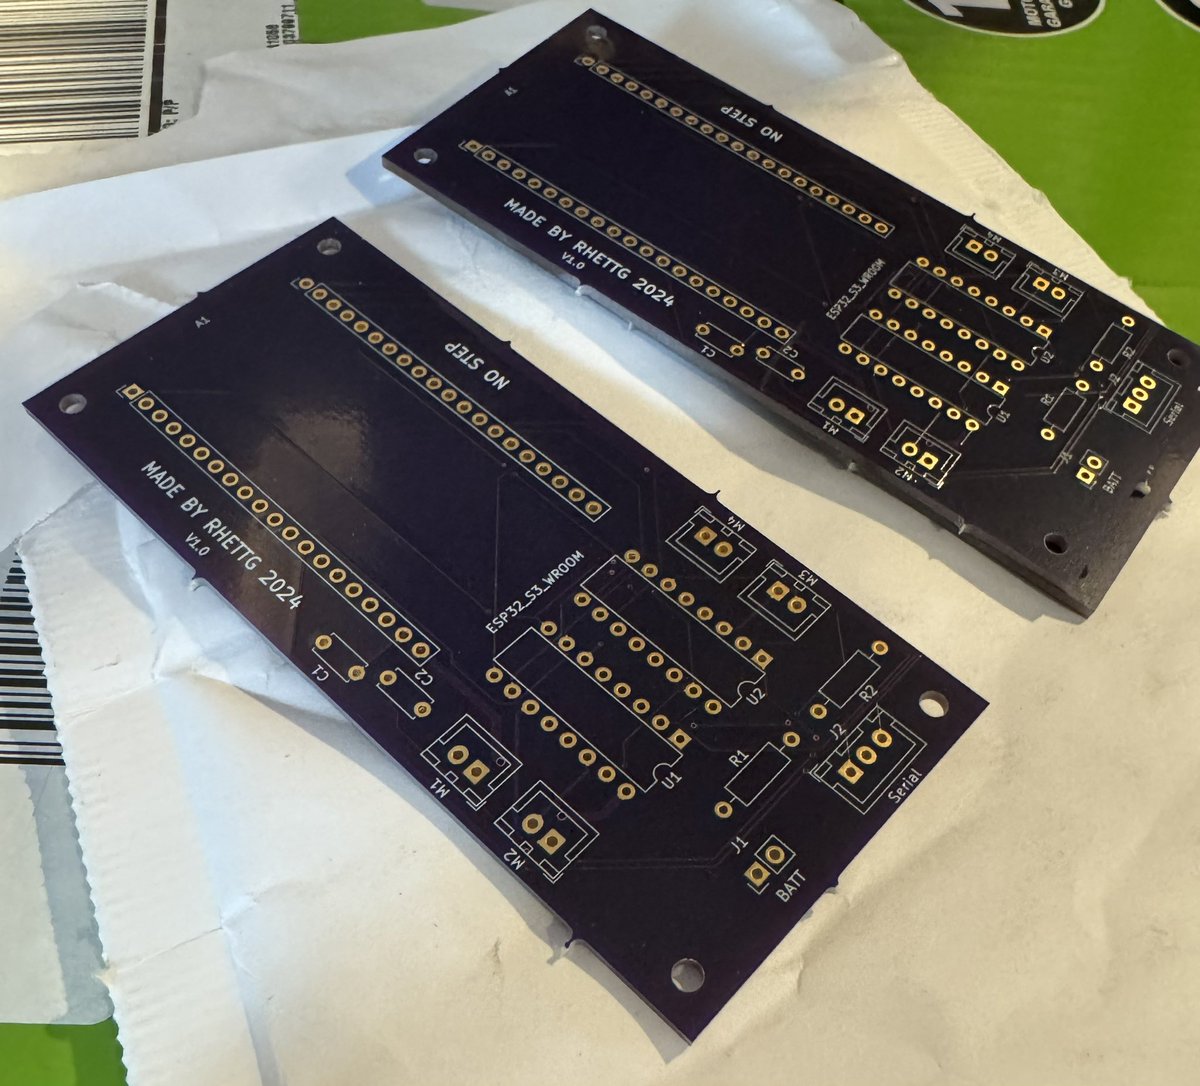 It’s here! My very first PCB design. Thanks @oshpark